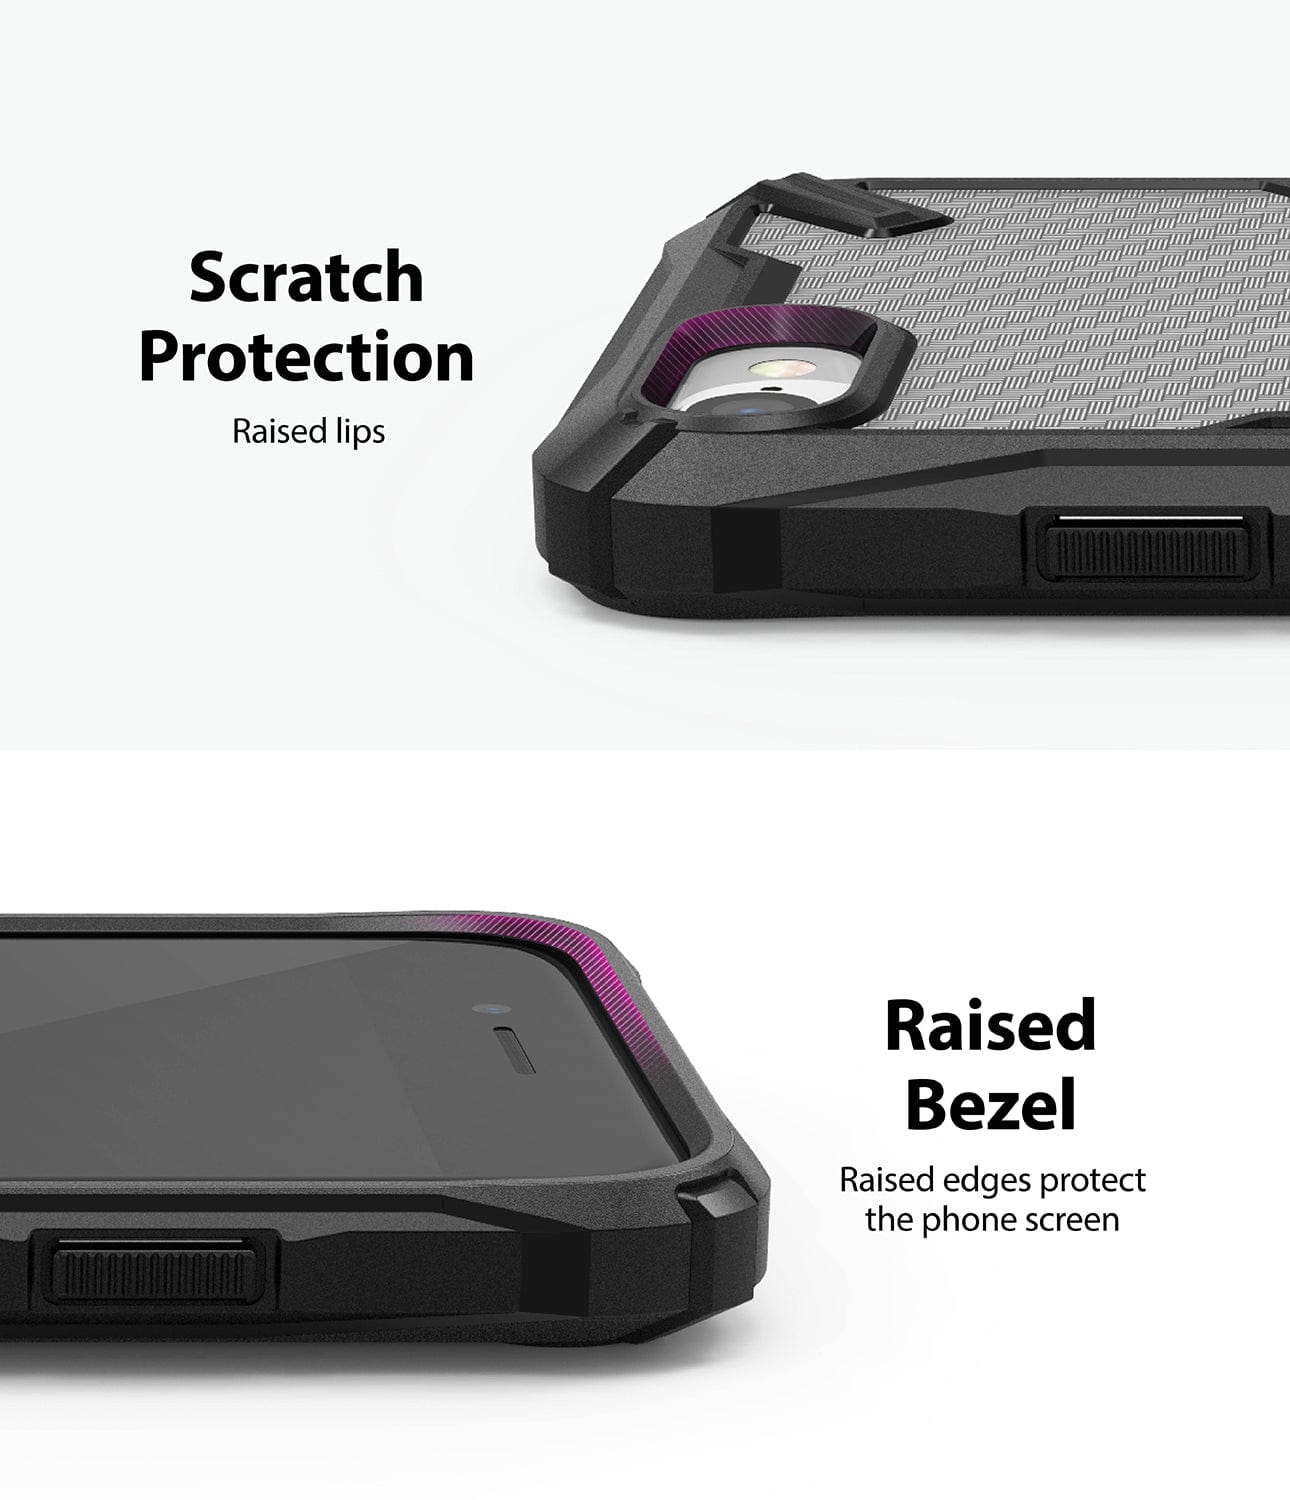 The durable PC clear cover and TPU bumper effectively safeguard the display and rounded sides of your device